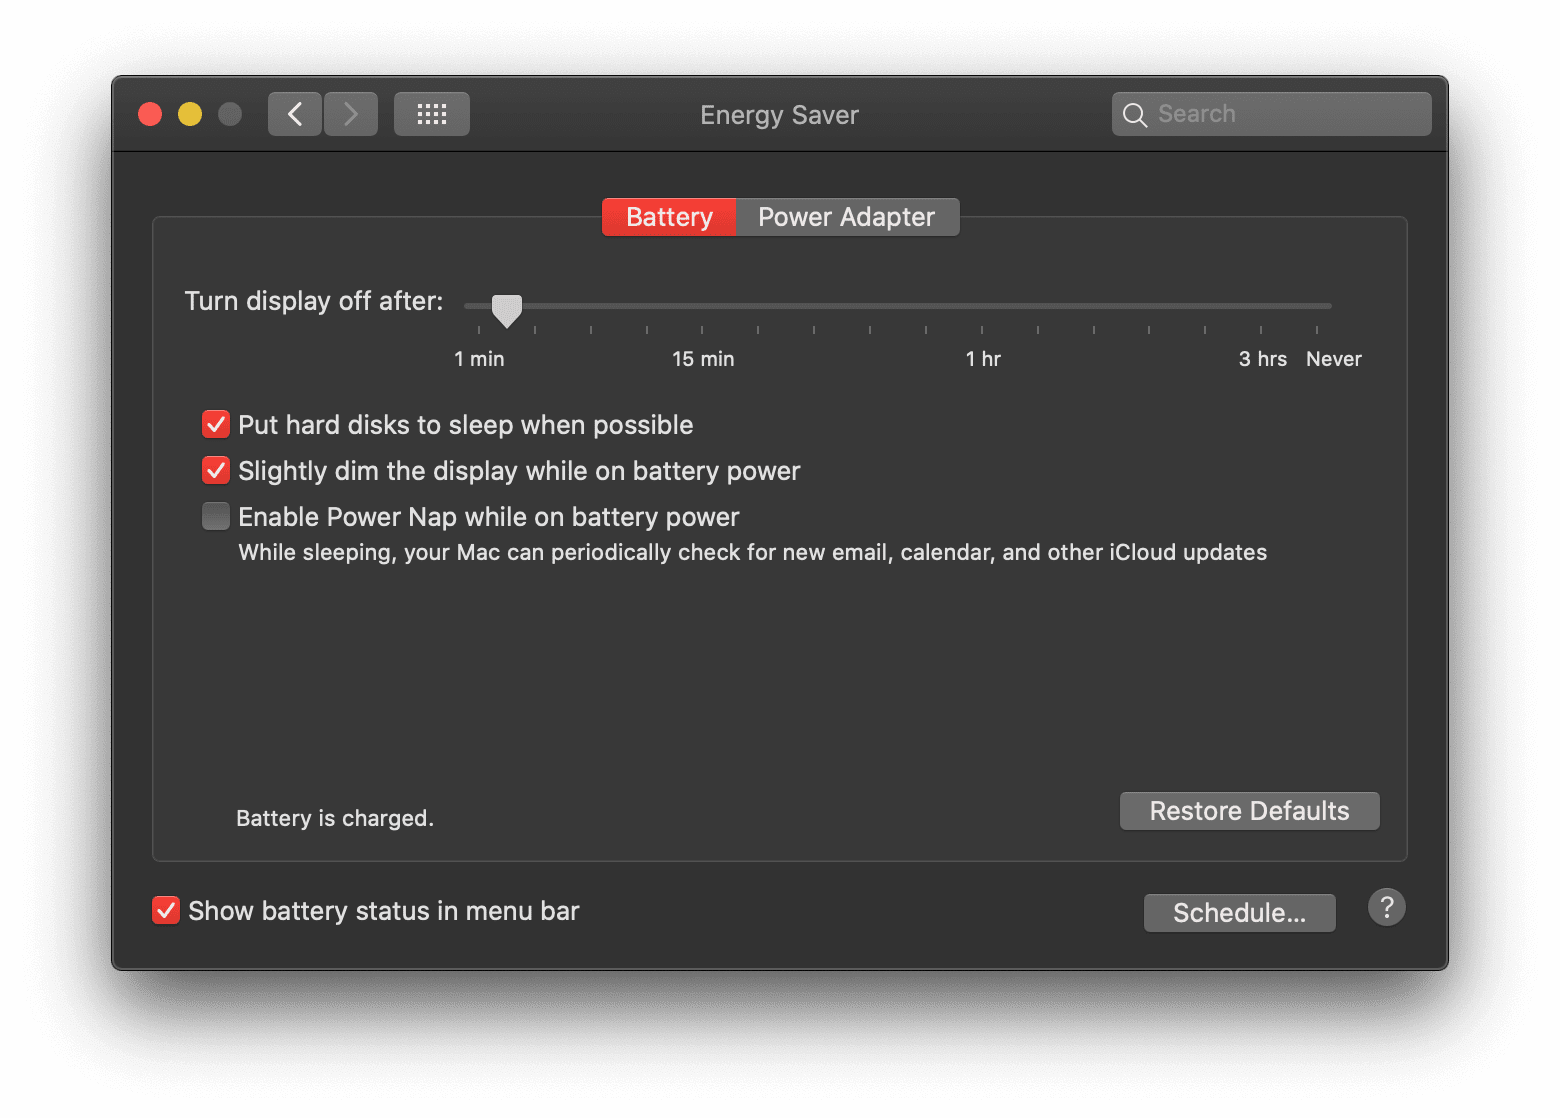 macOS Preferences in the 'Energy Saver' section.